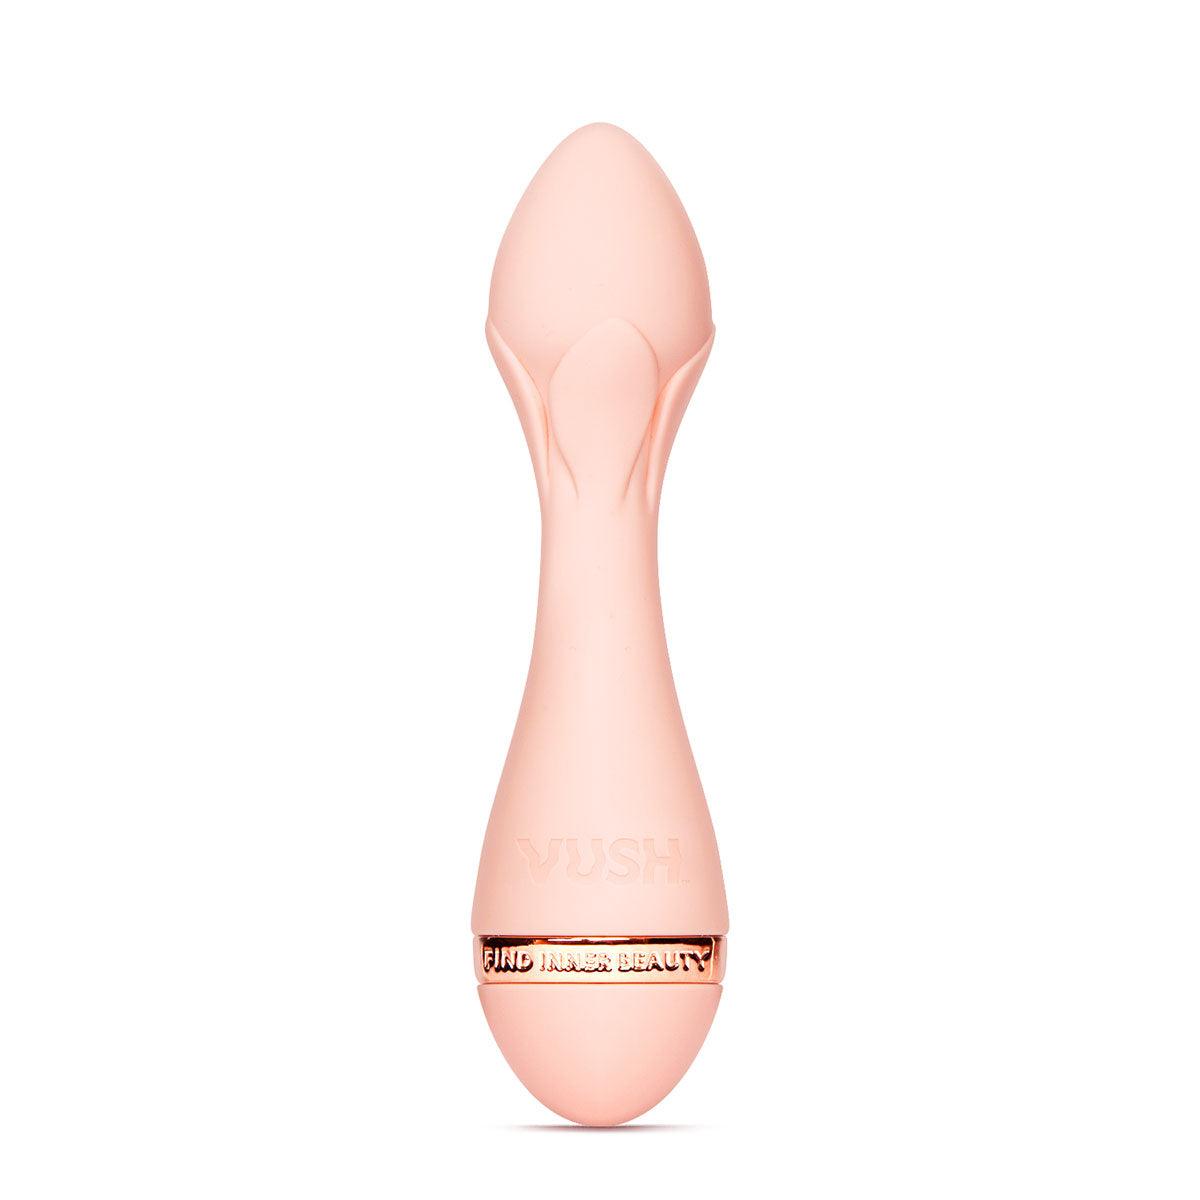 VUSH Rose 2 Precision Bullet Vibrator - Buy At Luxury Toy X - Free 3-Day Shipping